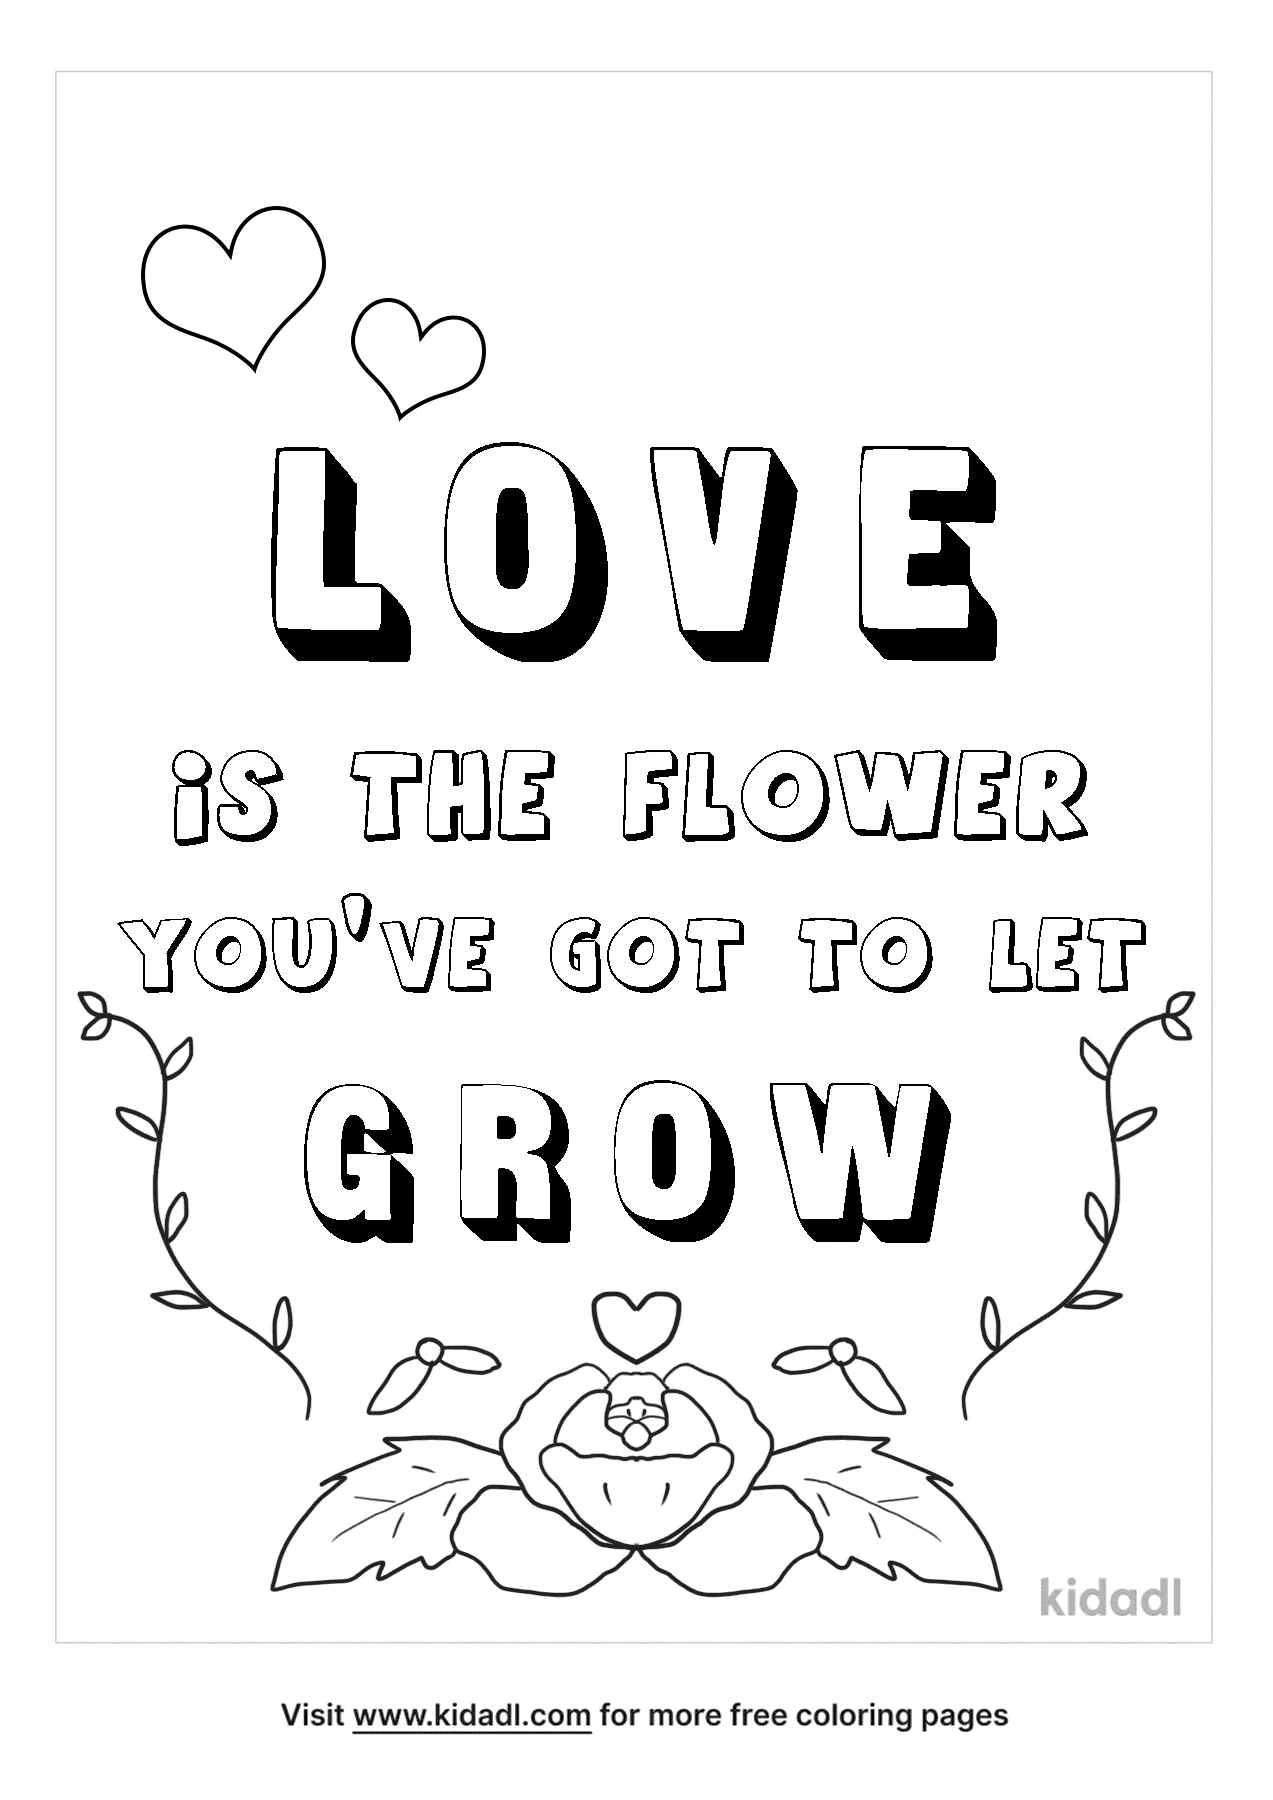 Love Quote Coloring Pages | Free Words-and-quotes Coloring Pages | Kidadl